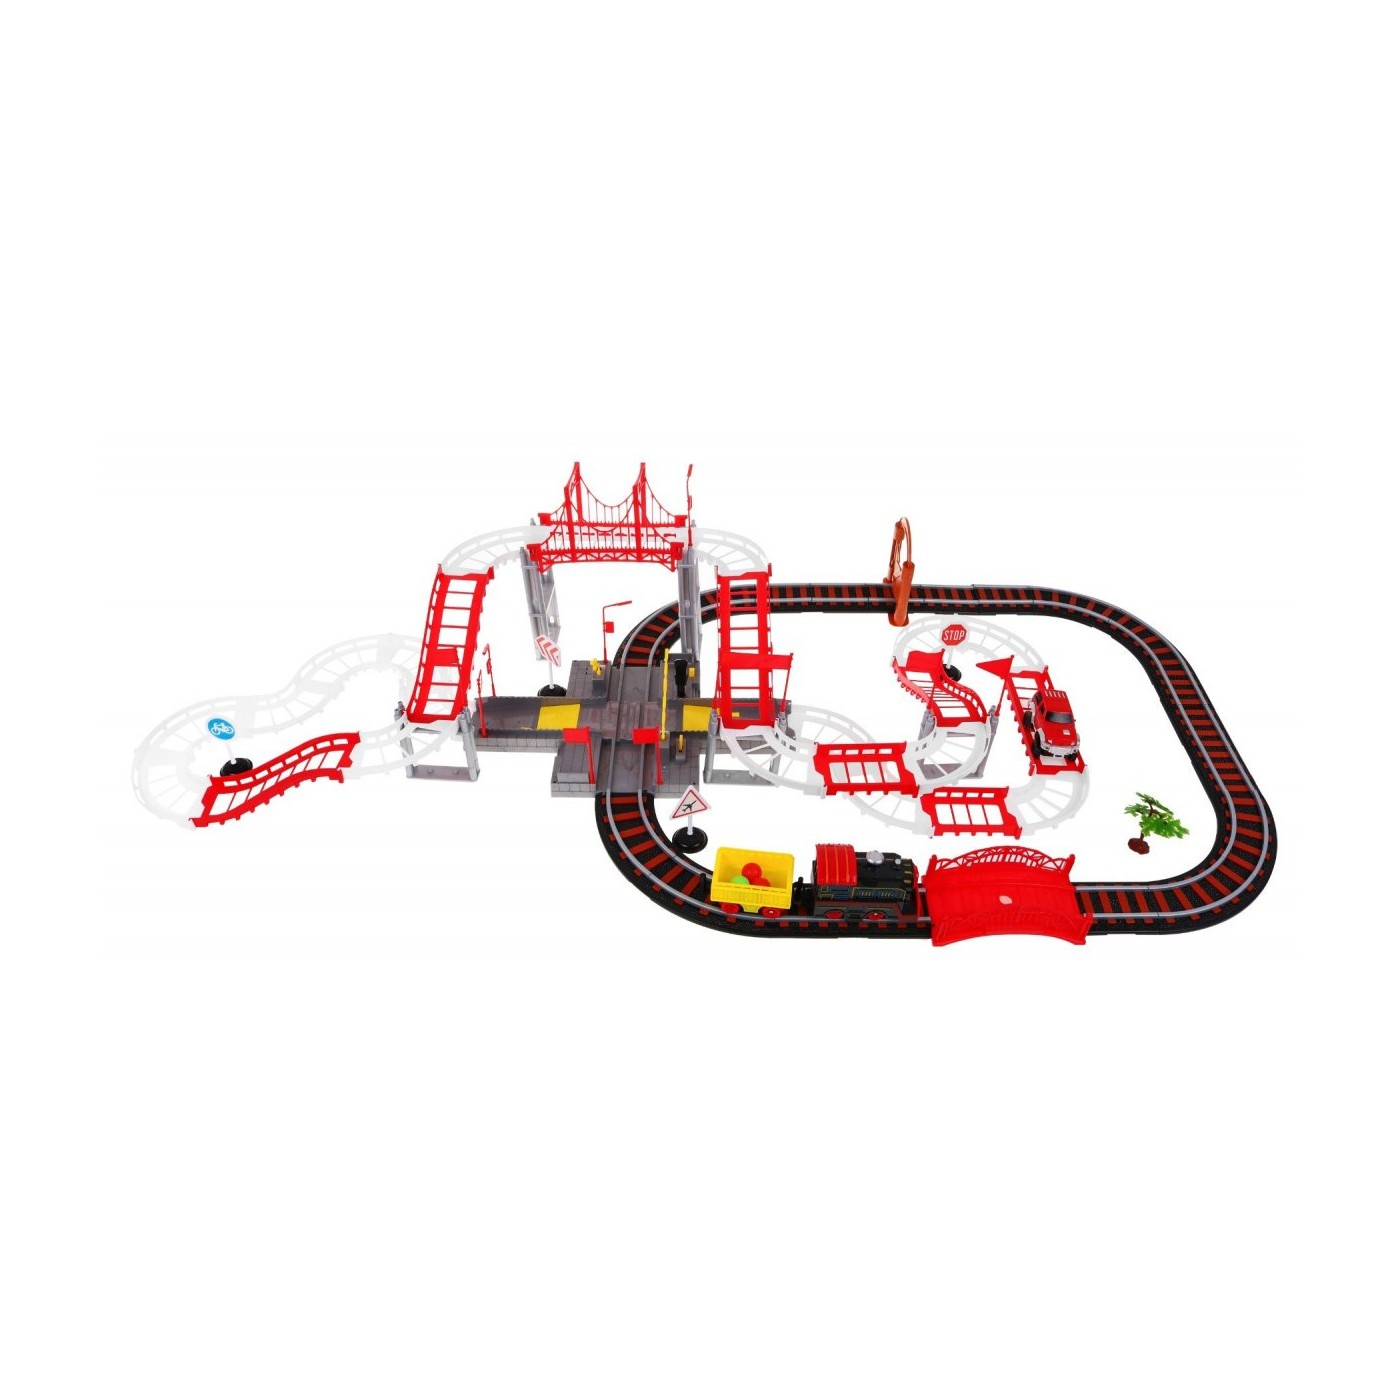 Cable car + track, train + toy car